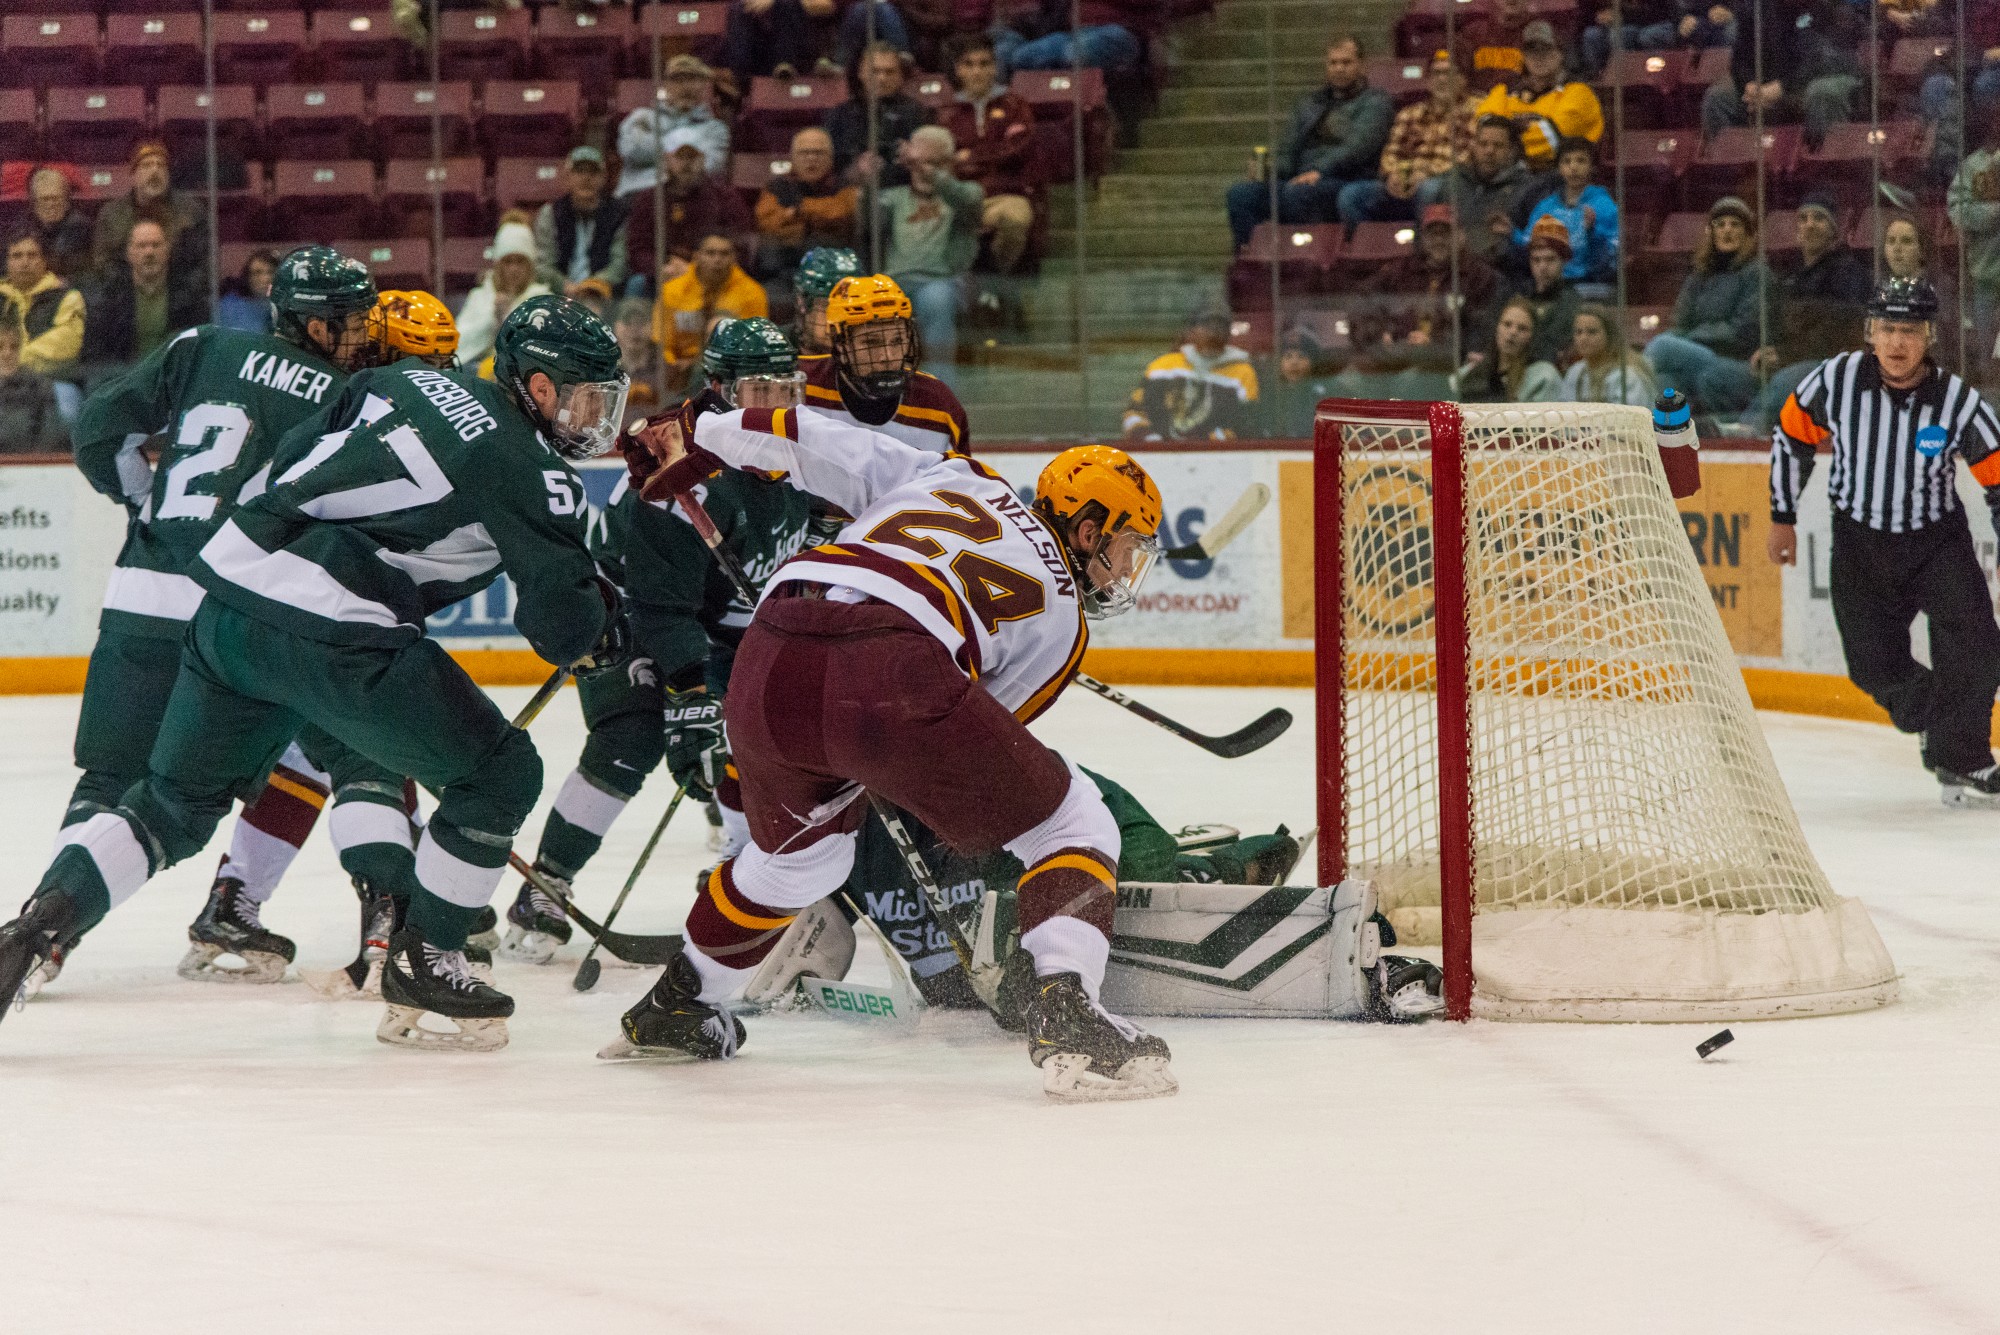 Gophers Forward Jaxon Nelson follows the puck after a goal attempt at the 3M Arena at Marriucci on Friday, Feb. 7, 2020. Gophers won against Michigan State 4-1.